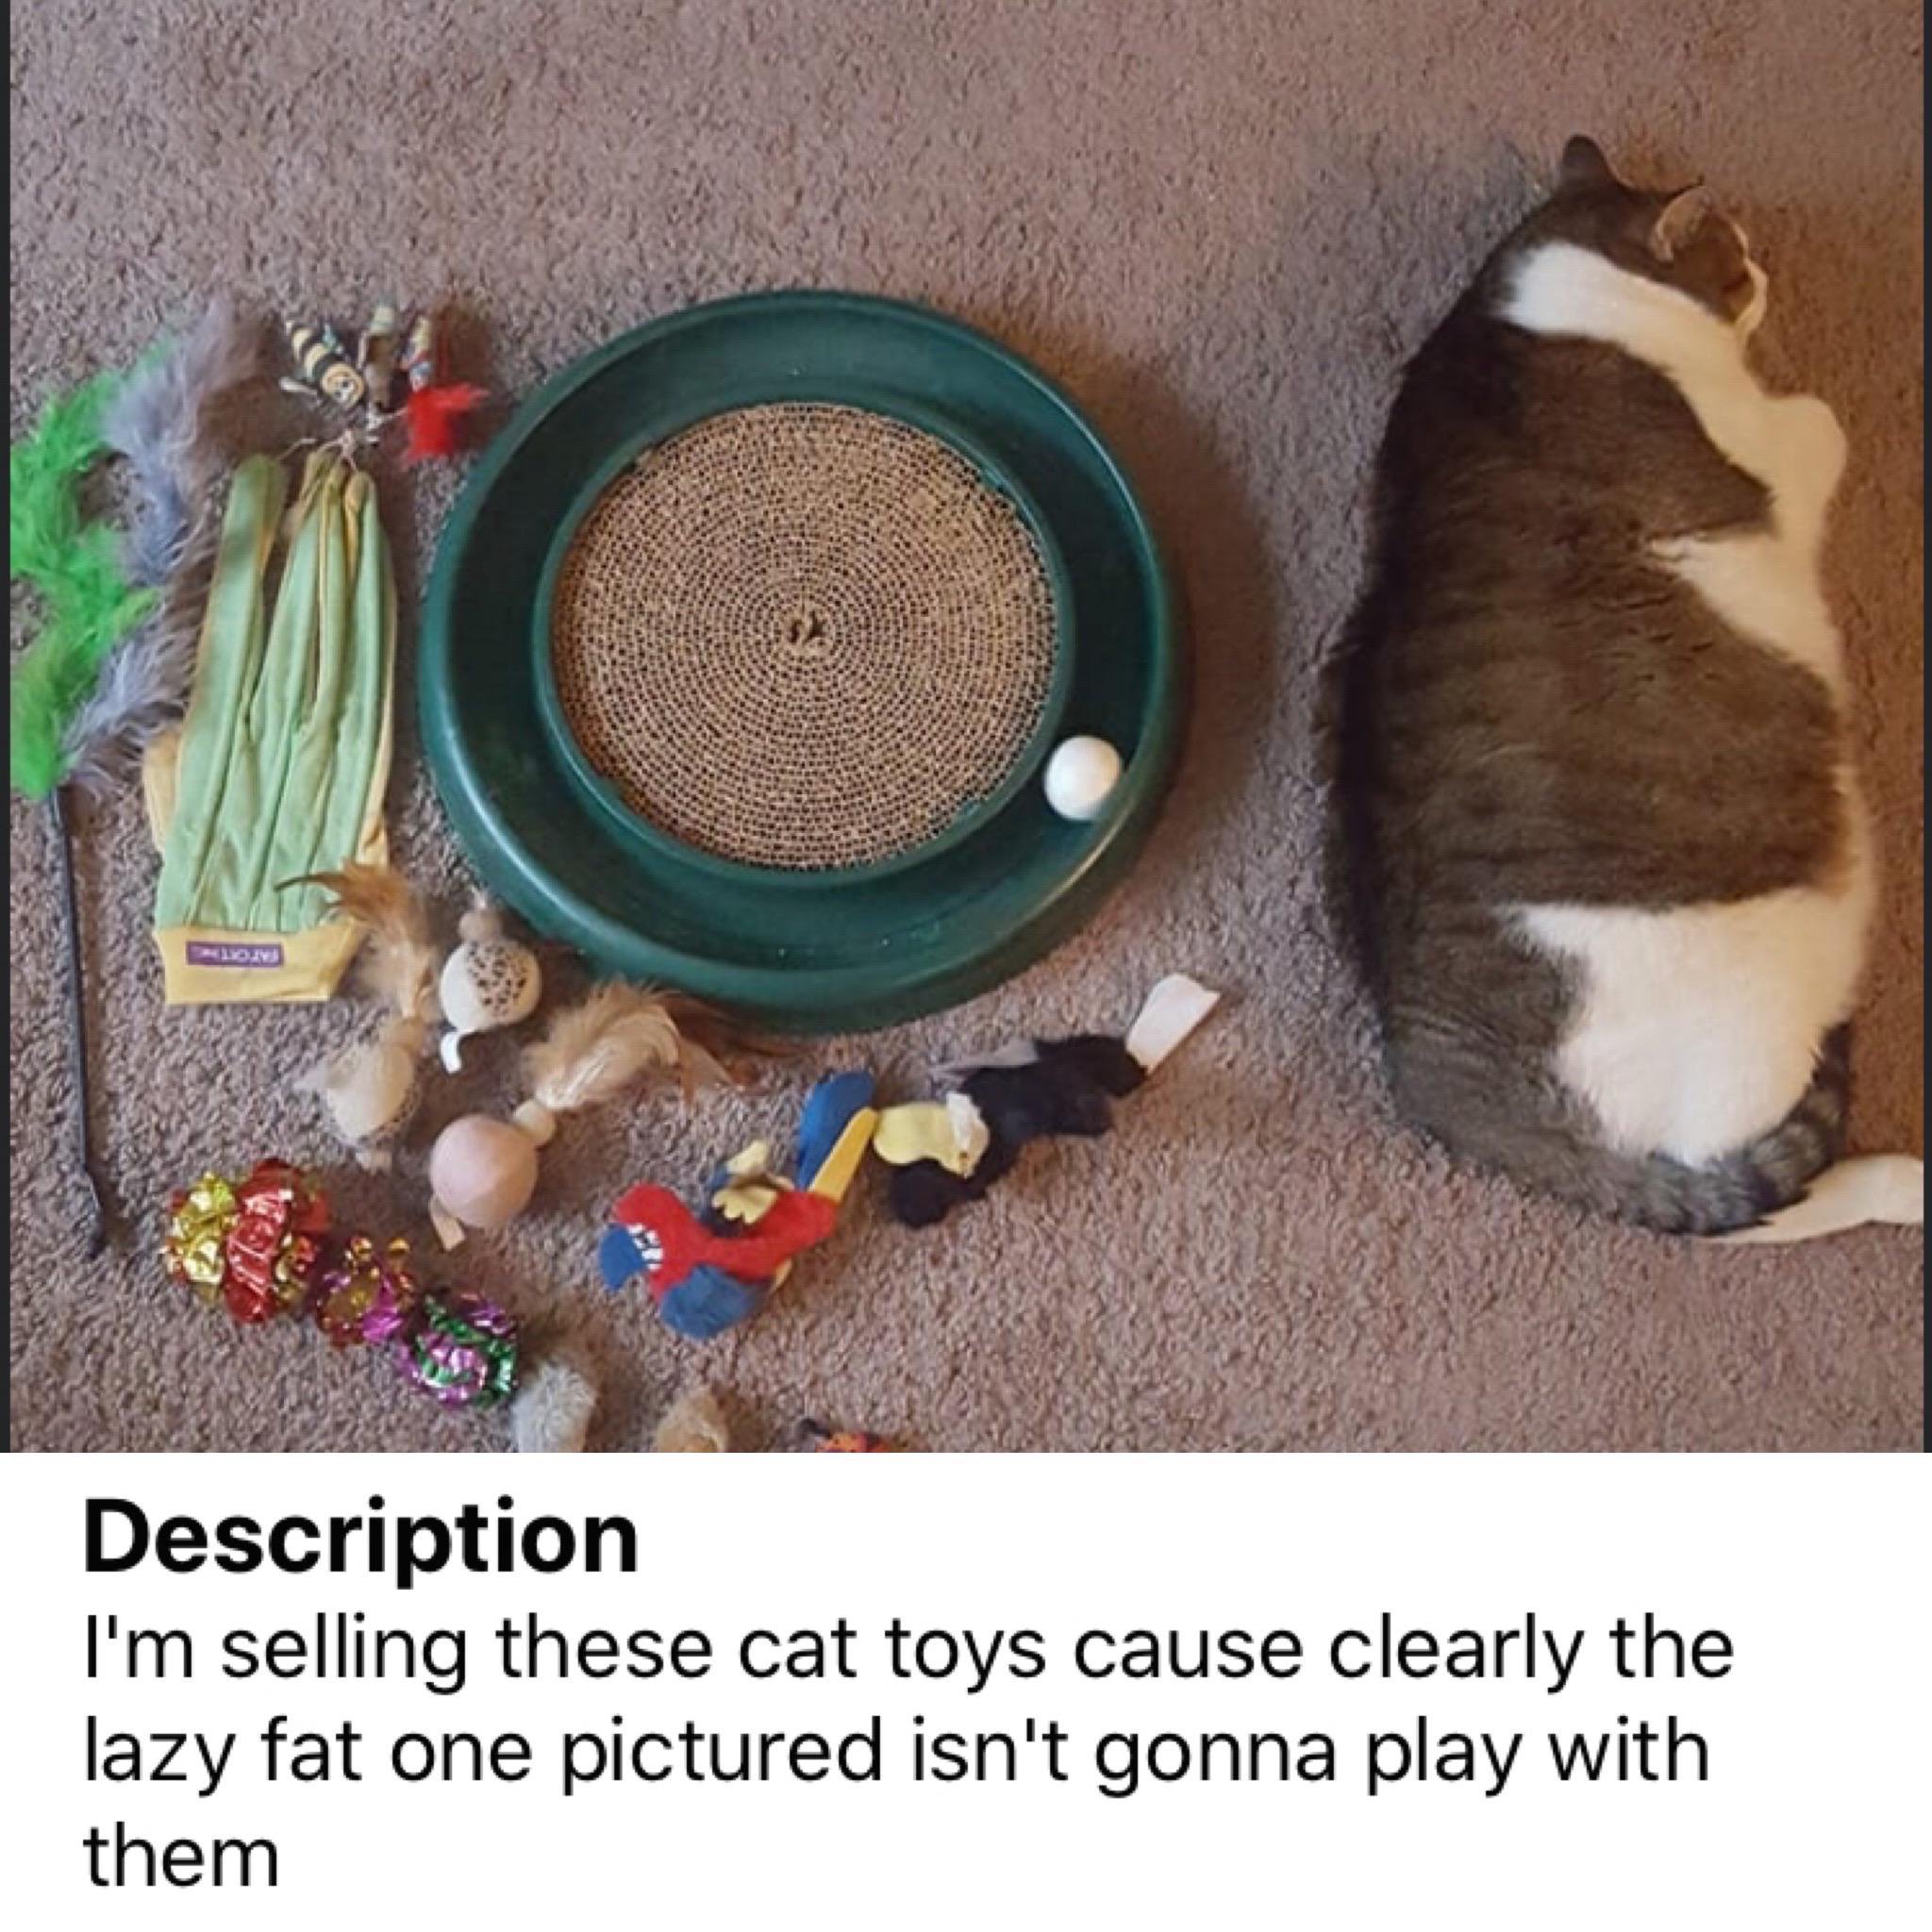 cat - Description I'm selling these cat toys cause clearly the lazy fat one pictured isn't gonna play with them